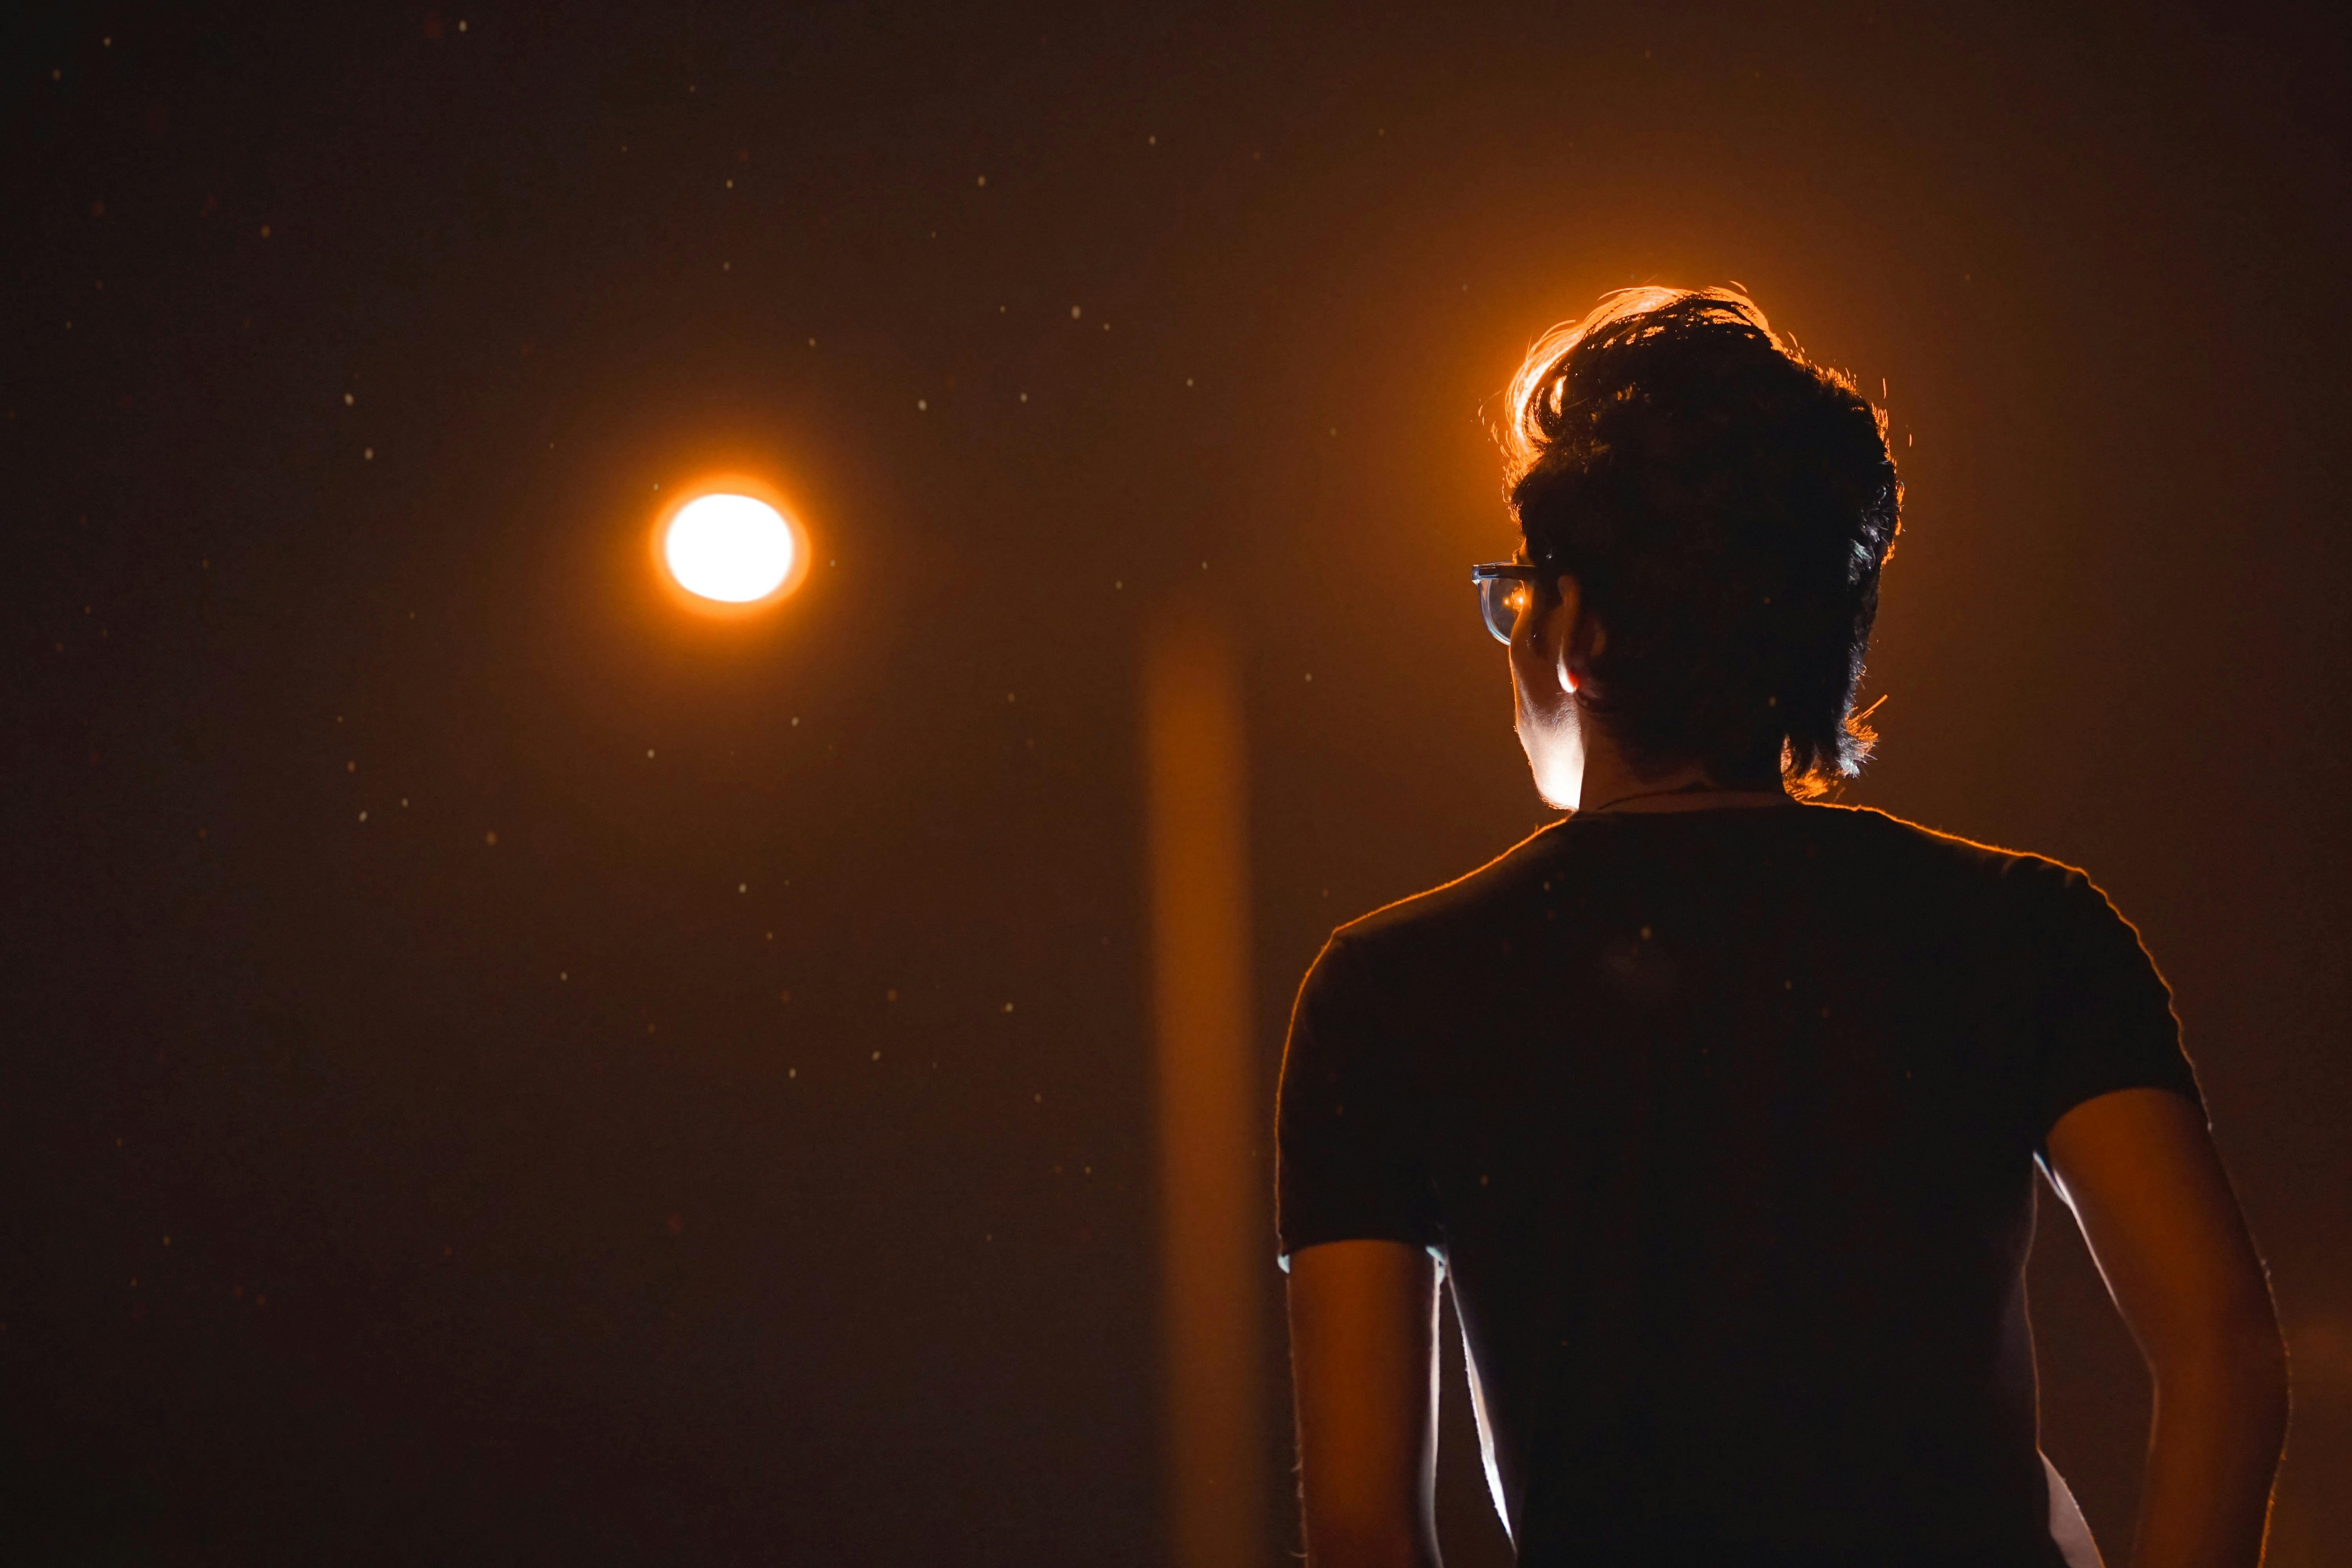 Back View Photo of Man in Glasses Posing During Night · Free Stock Photo